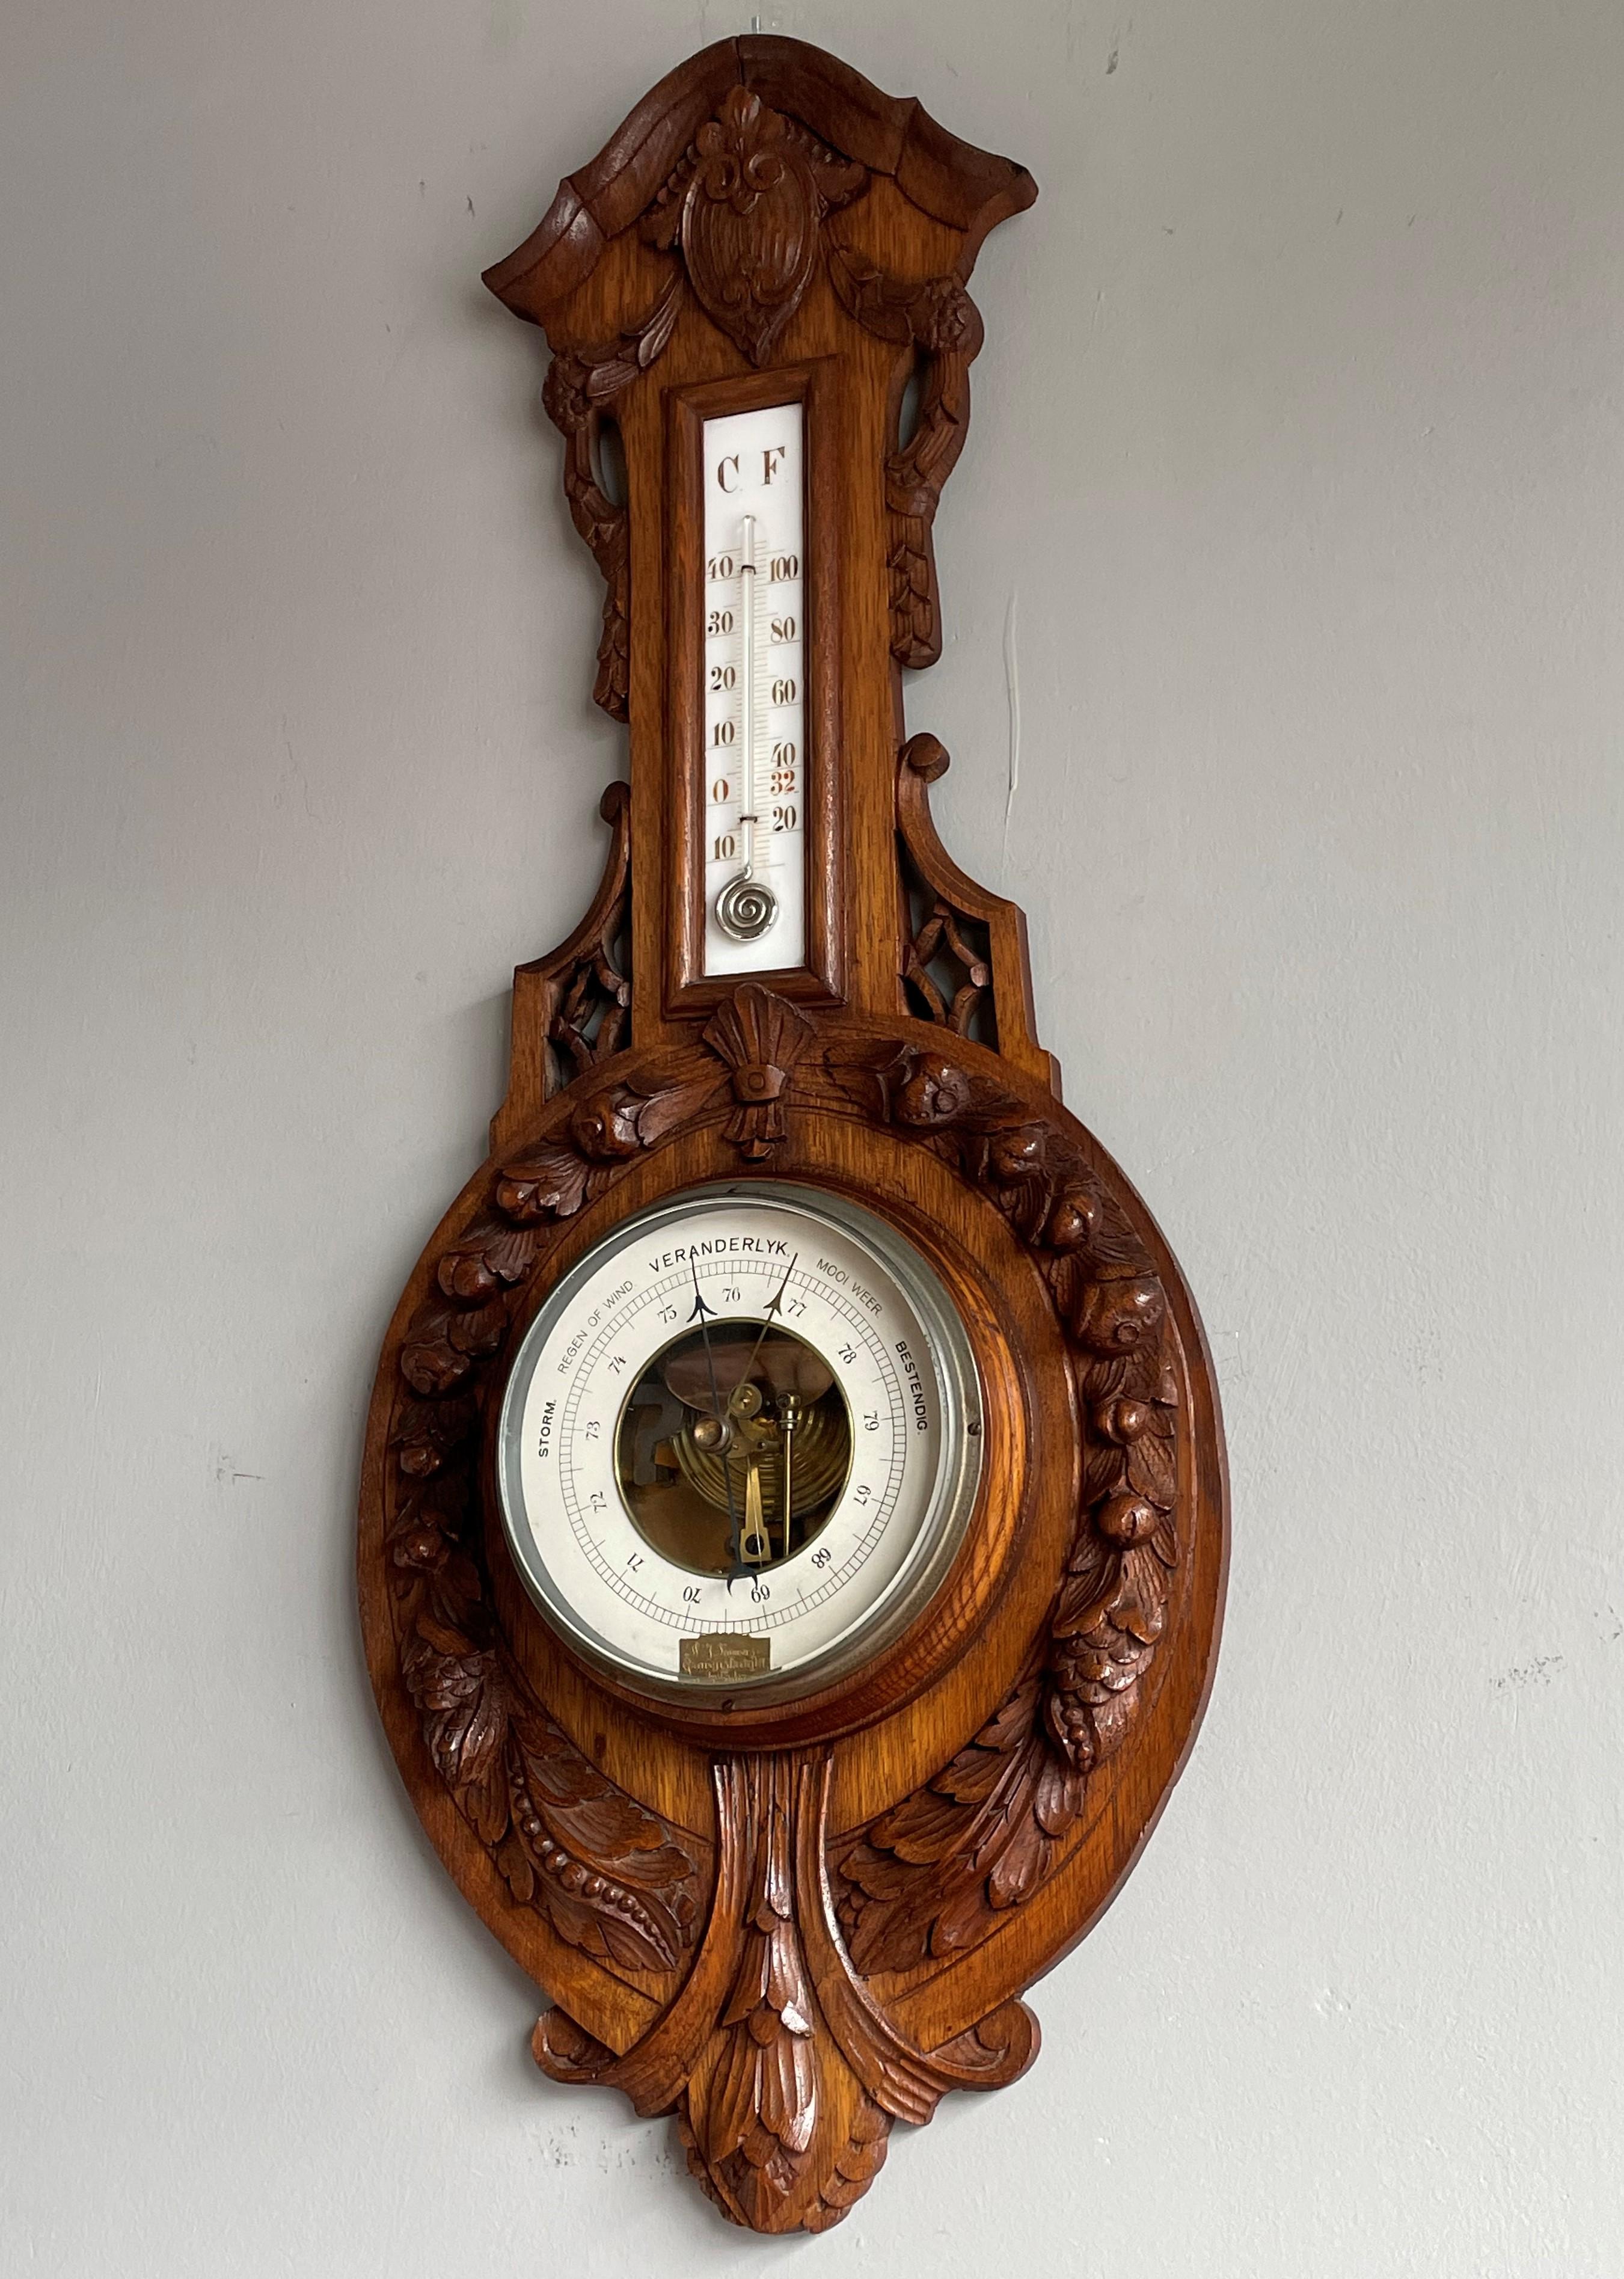 Stunning design Dutch Arts and Crafts era barometer and thermometer.

It even comes with a small gilt brass maker's plaque inside the barometer window that reads W.J. Lauwers, Gravenstraat 1, Amsterdam.

This late 19th or early 20th century,